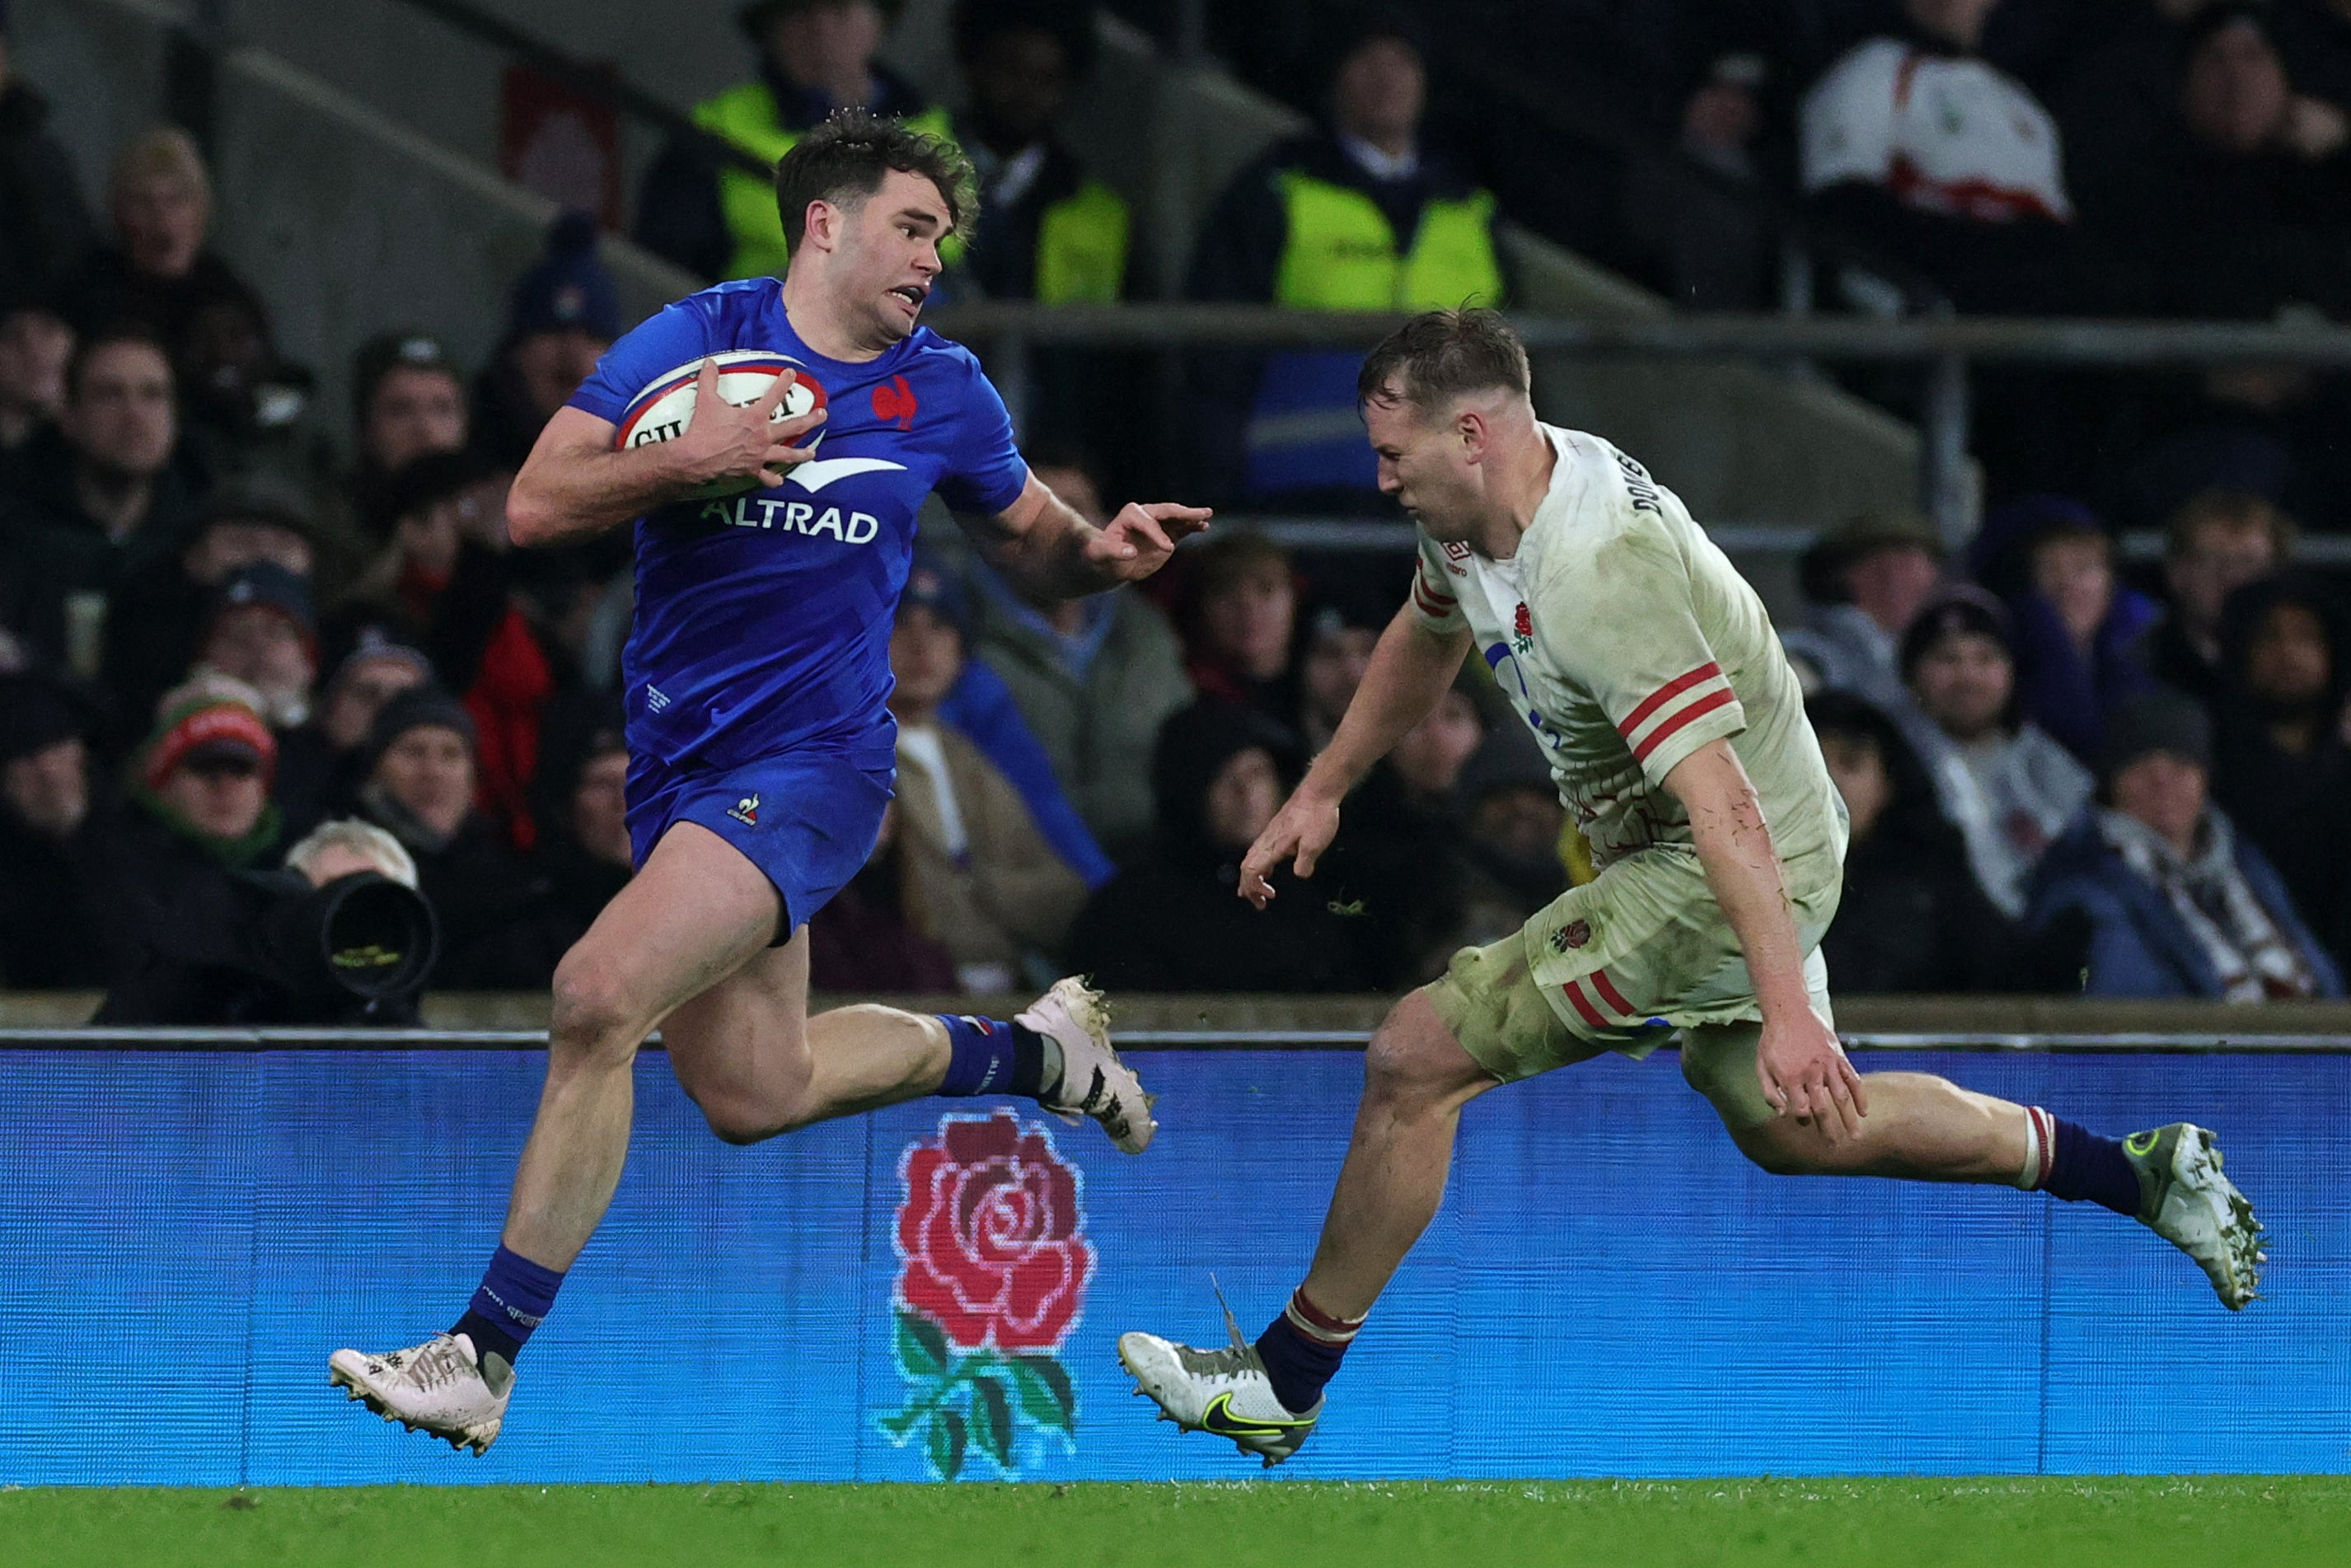 England will be gunning for revenge after a heavy defeat last year